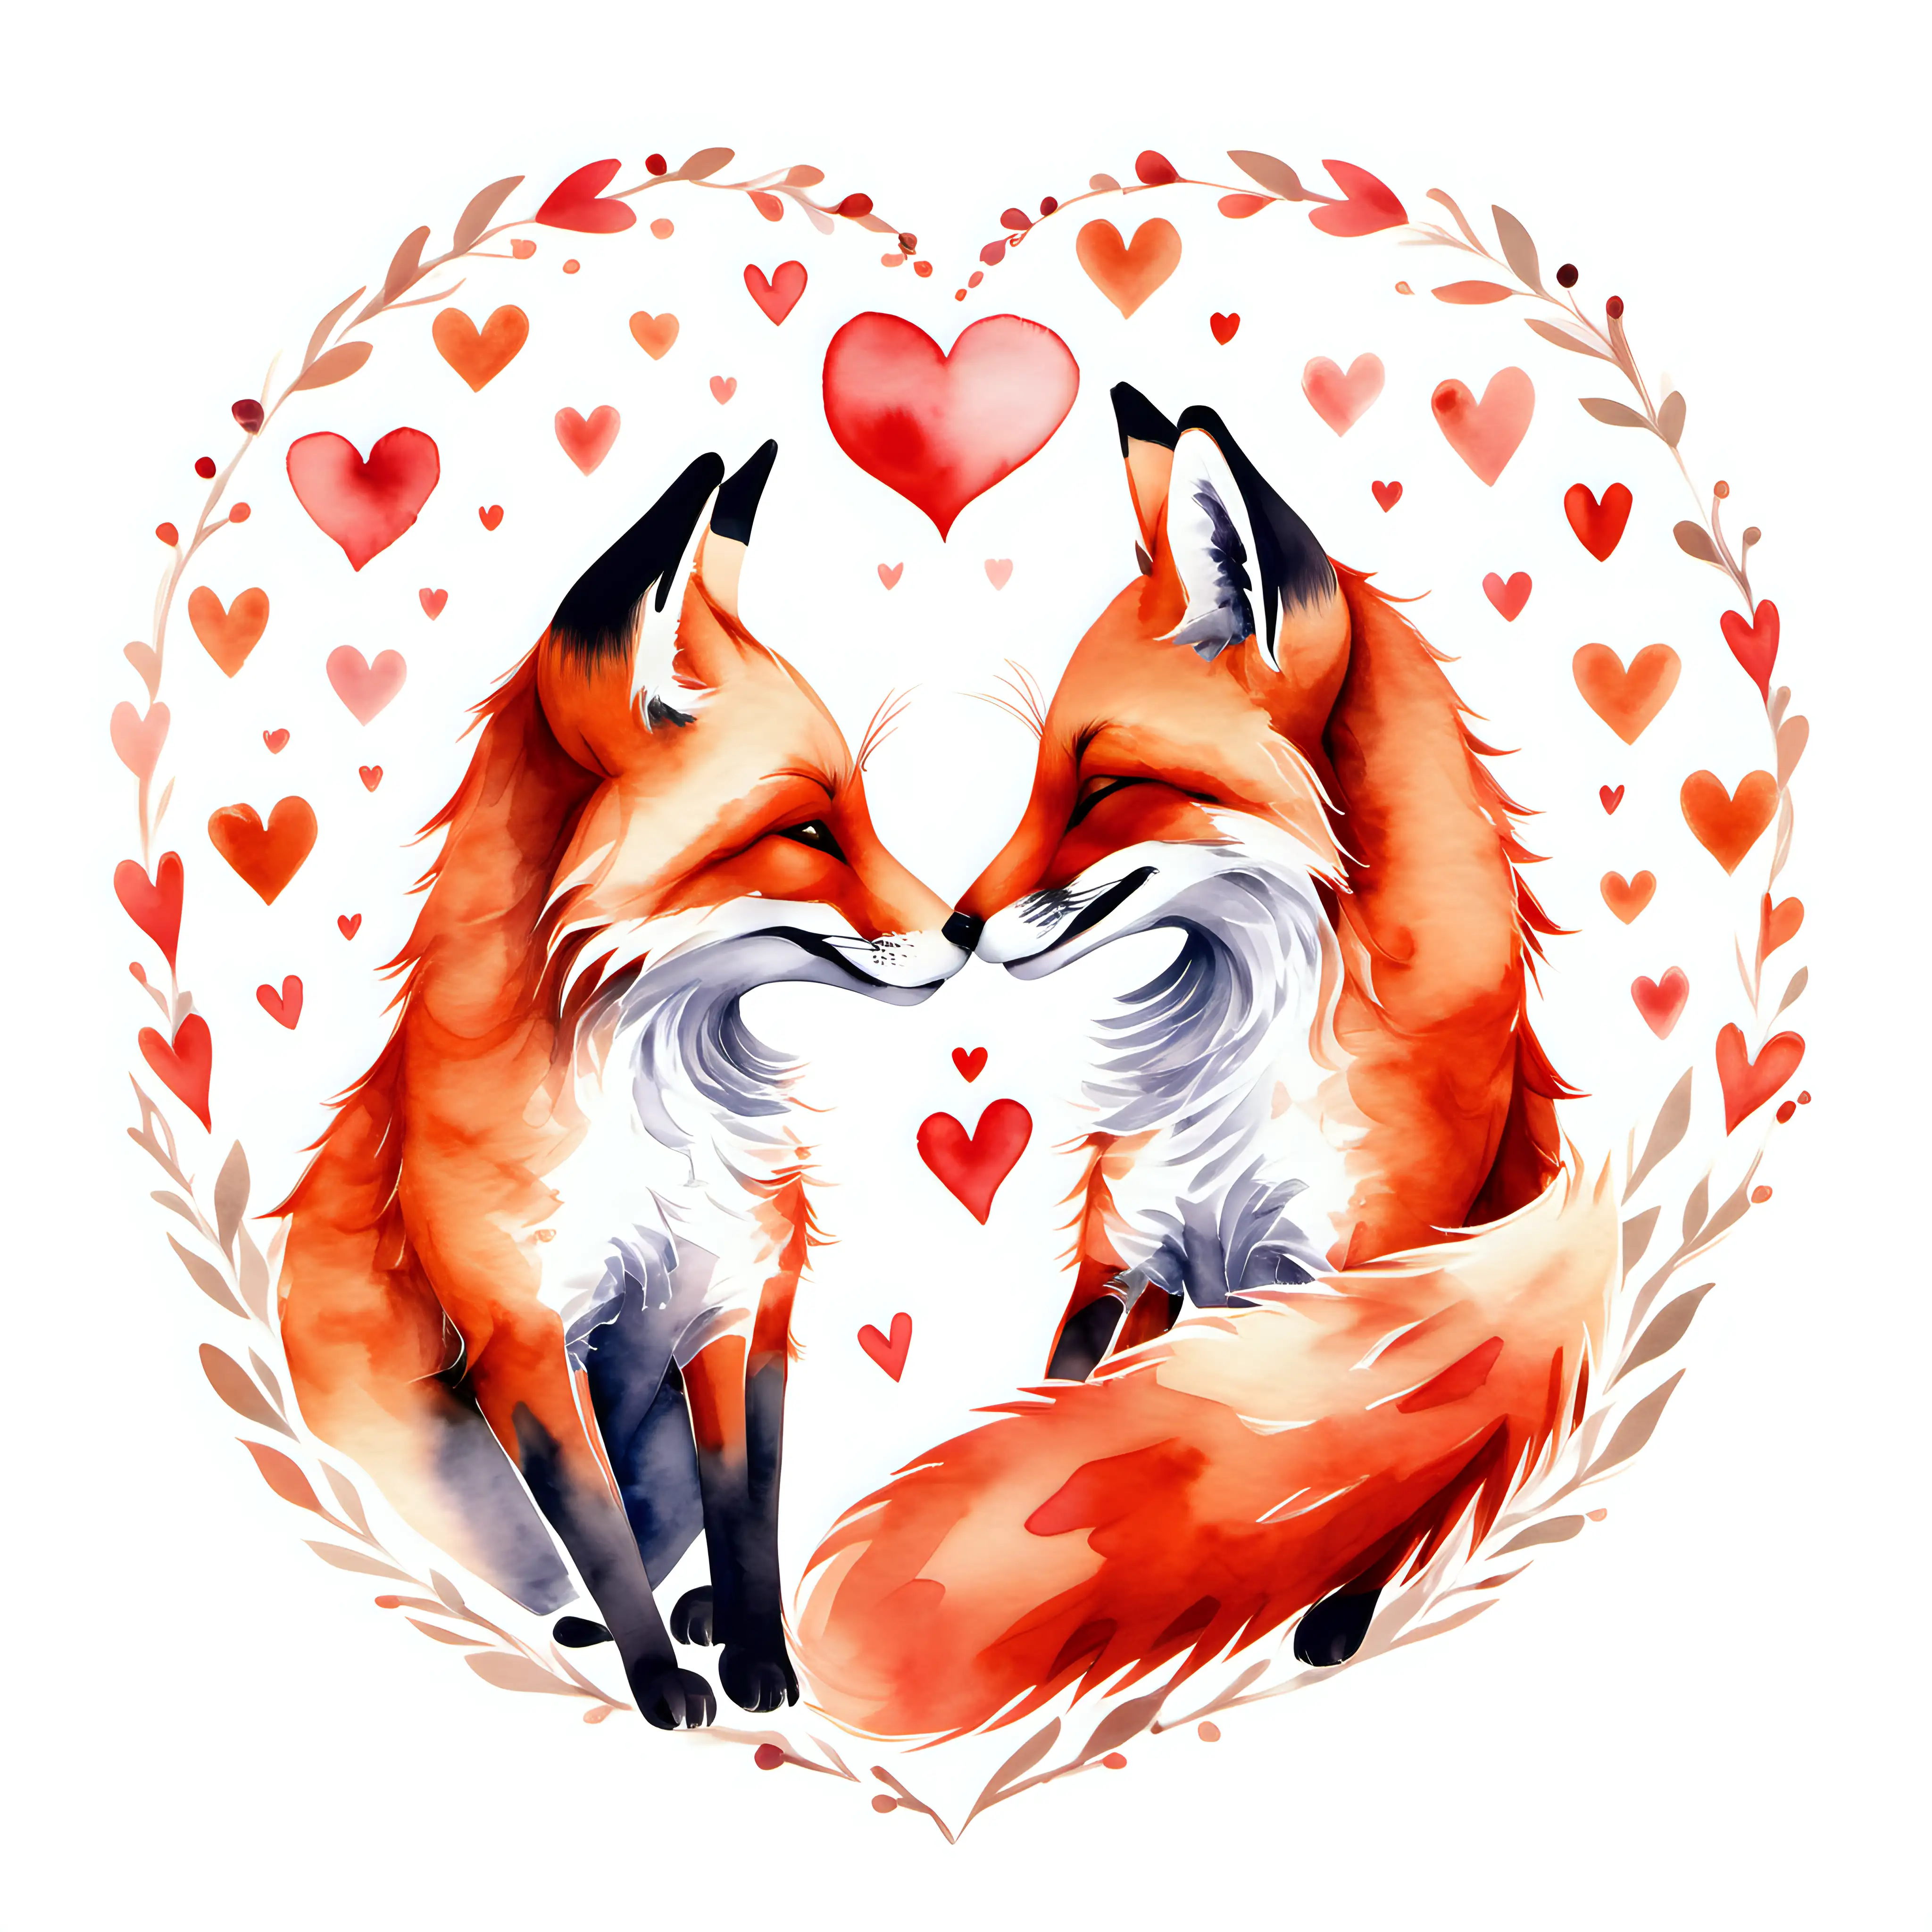 watercolor style, two red foxes touching noses with hearts around them on a white background.